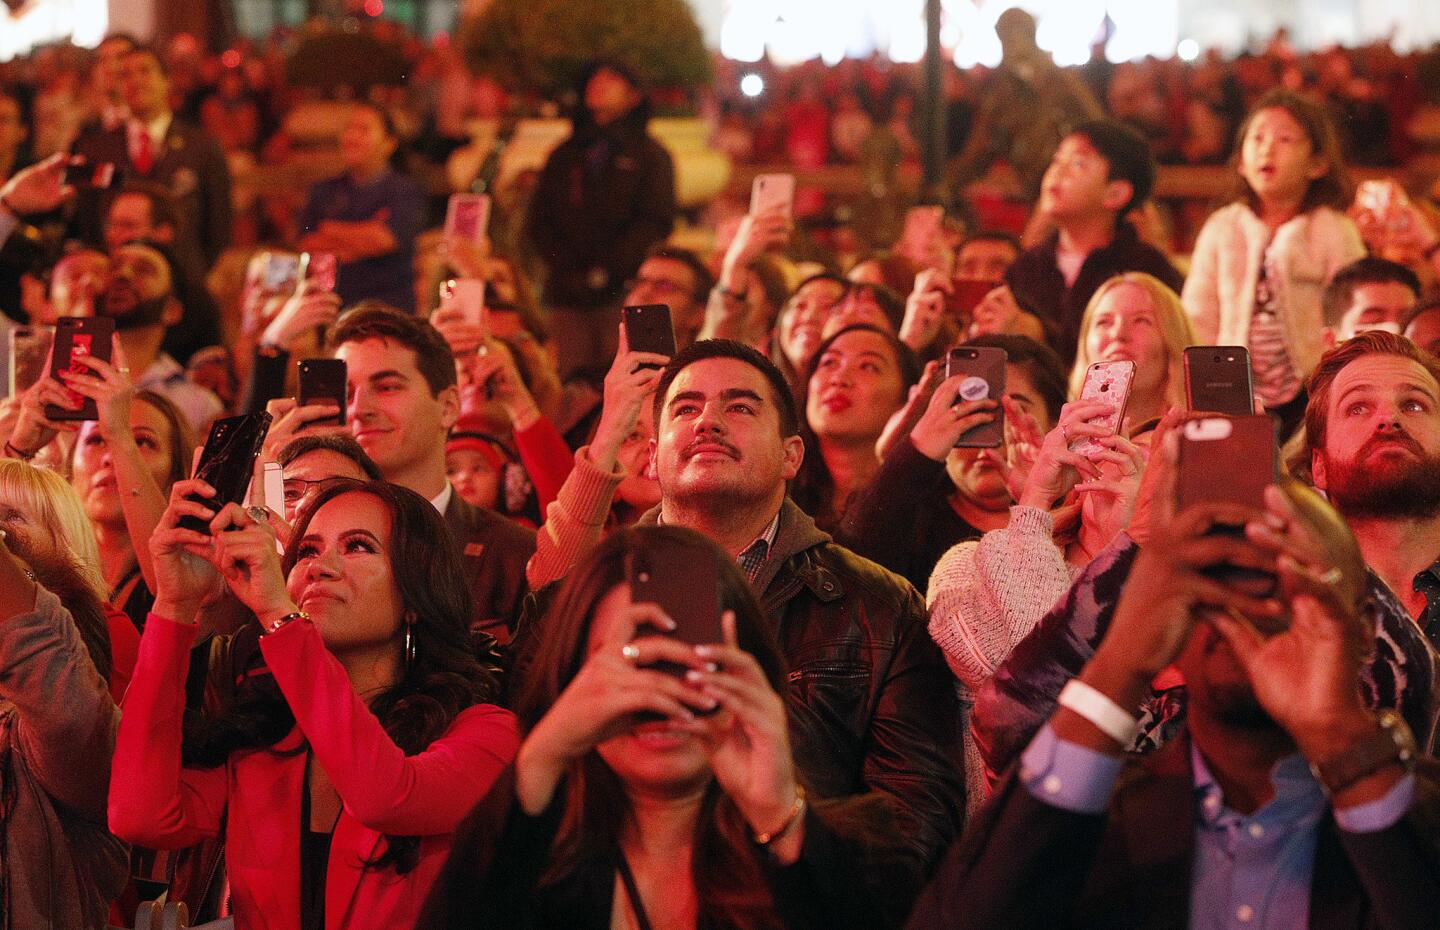 People flooded with red light have their cell phones out for the lighting of the tree at the Americana at Brand for the annual Lighting of the Tree ceremony on Thursday, November 15, 2018. There was a performance before the tree lighting and Santa made an appearance.